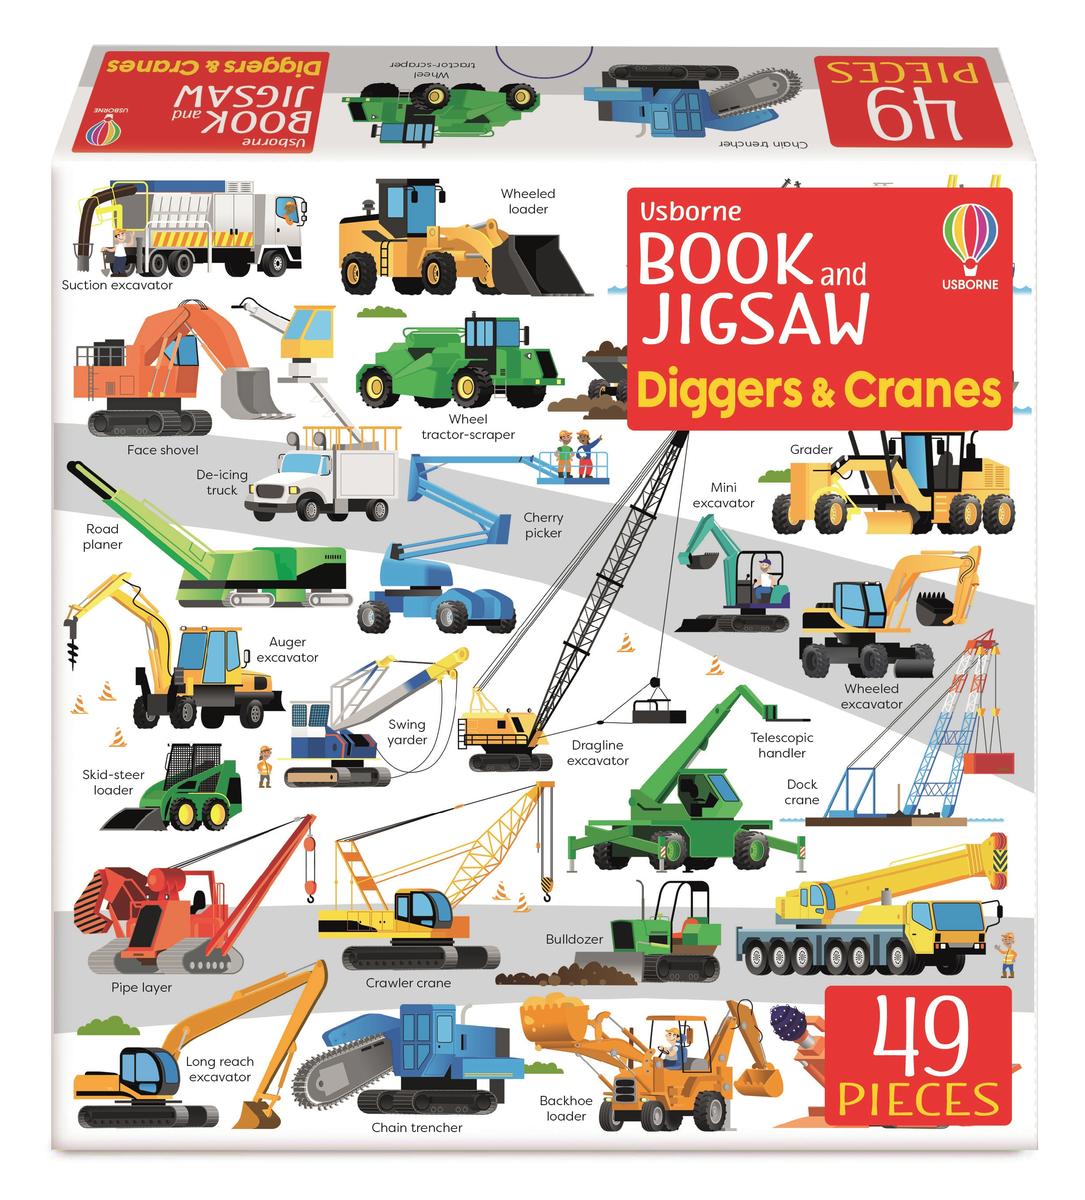 Usborne Book and Jigsaw - Diggers and Cranes